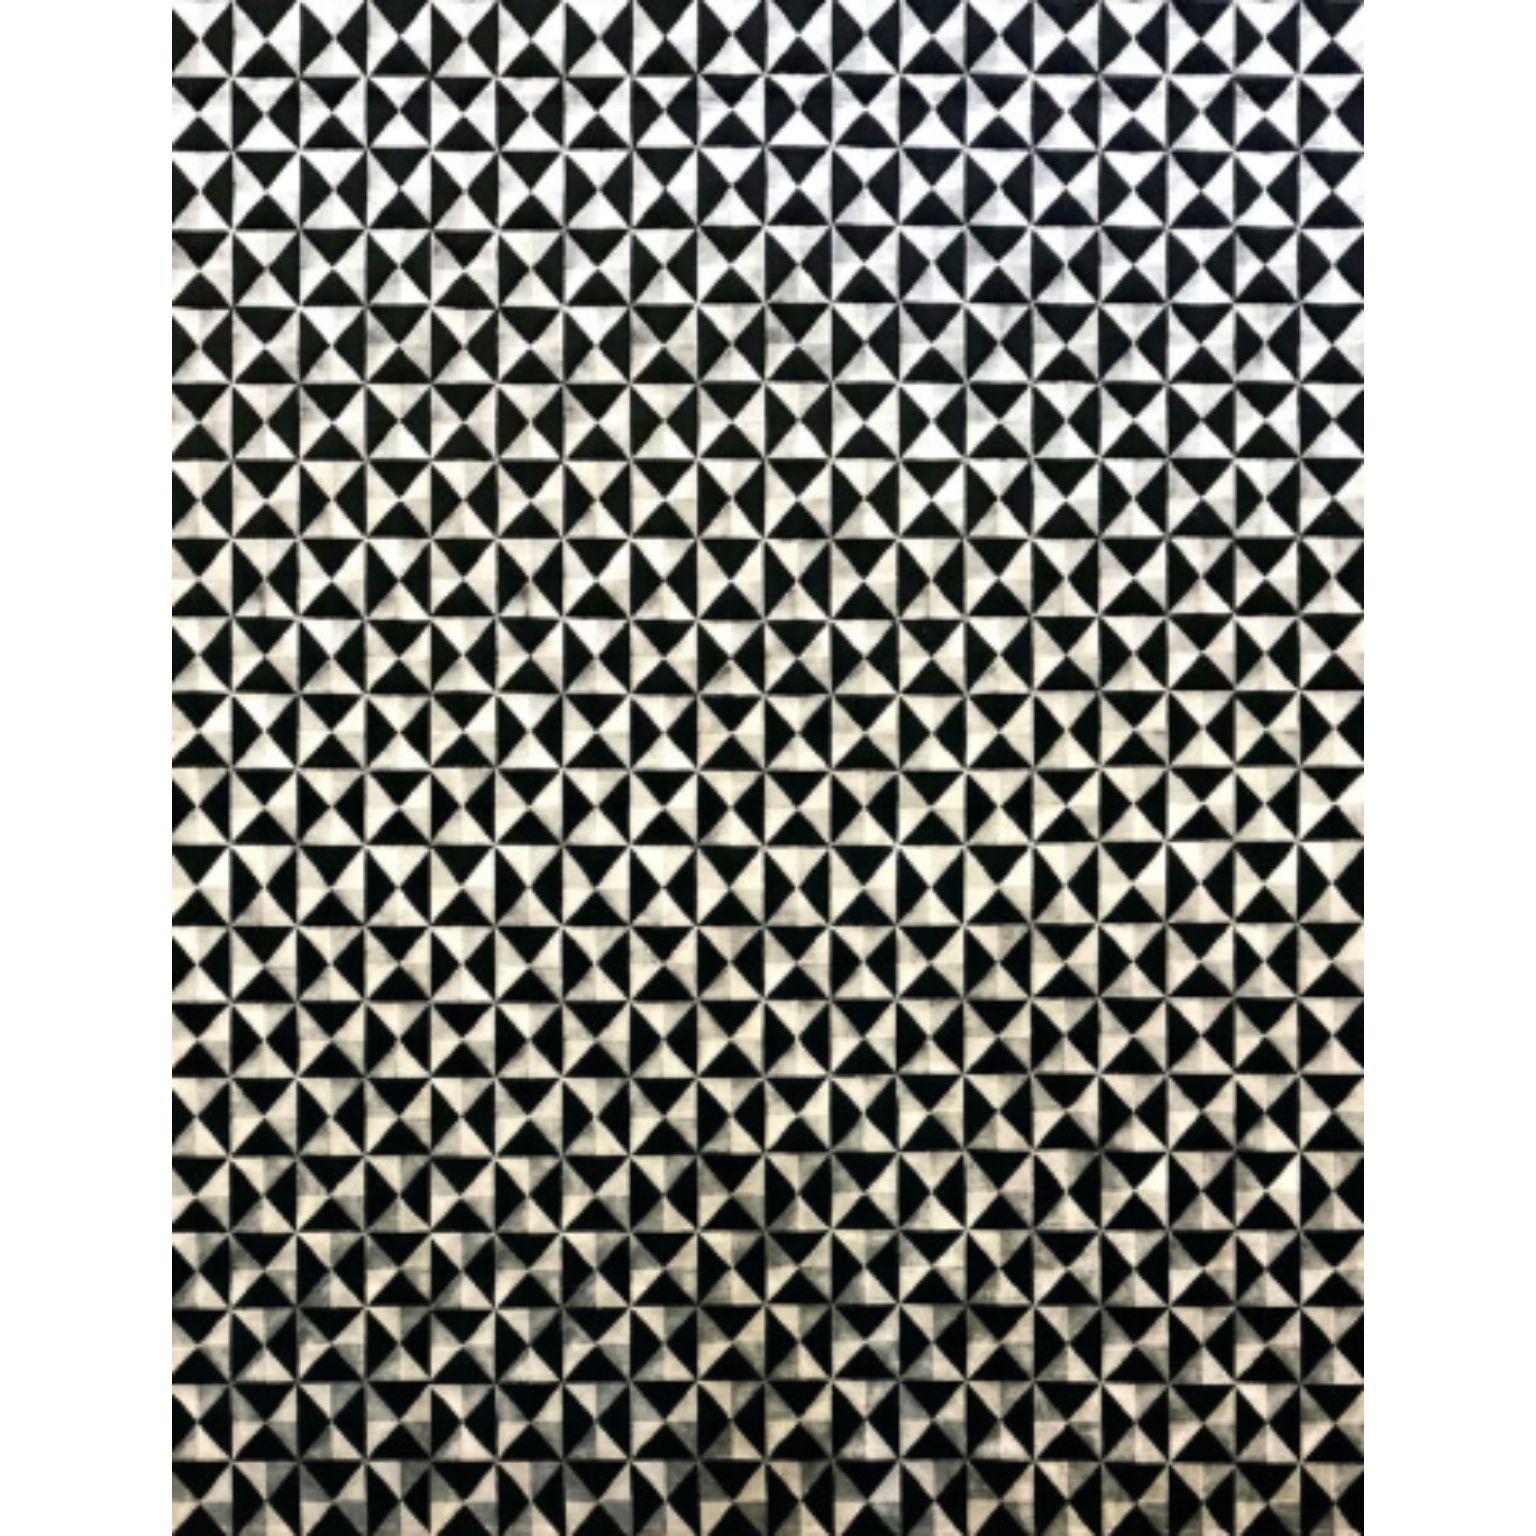 ILLUSION 200 Rug by Illulian
Dimensions: D300 x H200 cm 
Materials: Wool 50%, Silk 50%
Variations available and prices may vary according to materials and sizes. 

Illulian, historic and prestigious rug company brand, internationally renowned